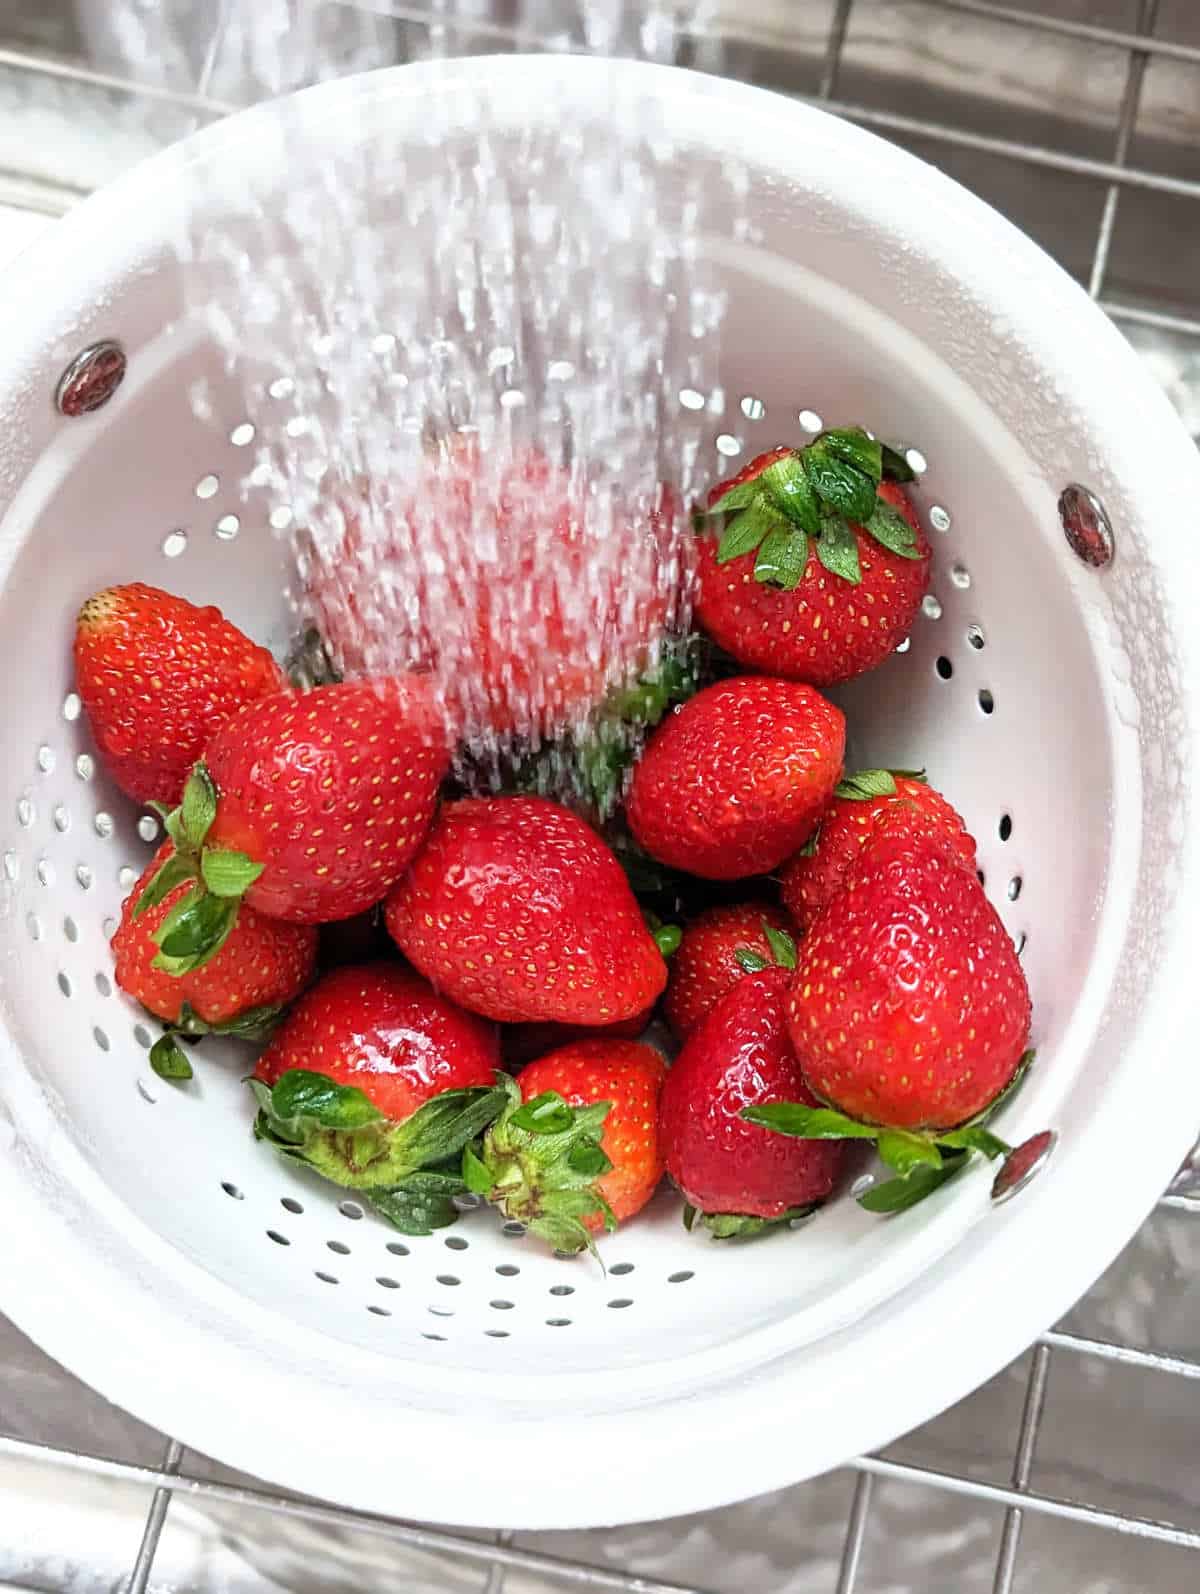 Fresh strawberries in a colander with water spraying down on them.